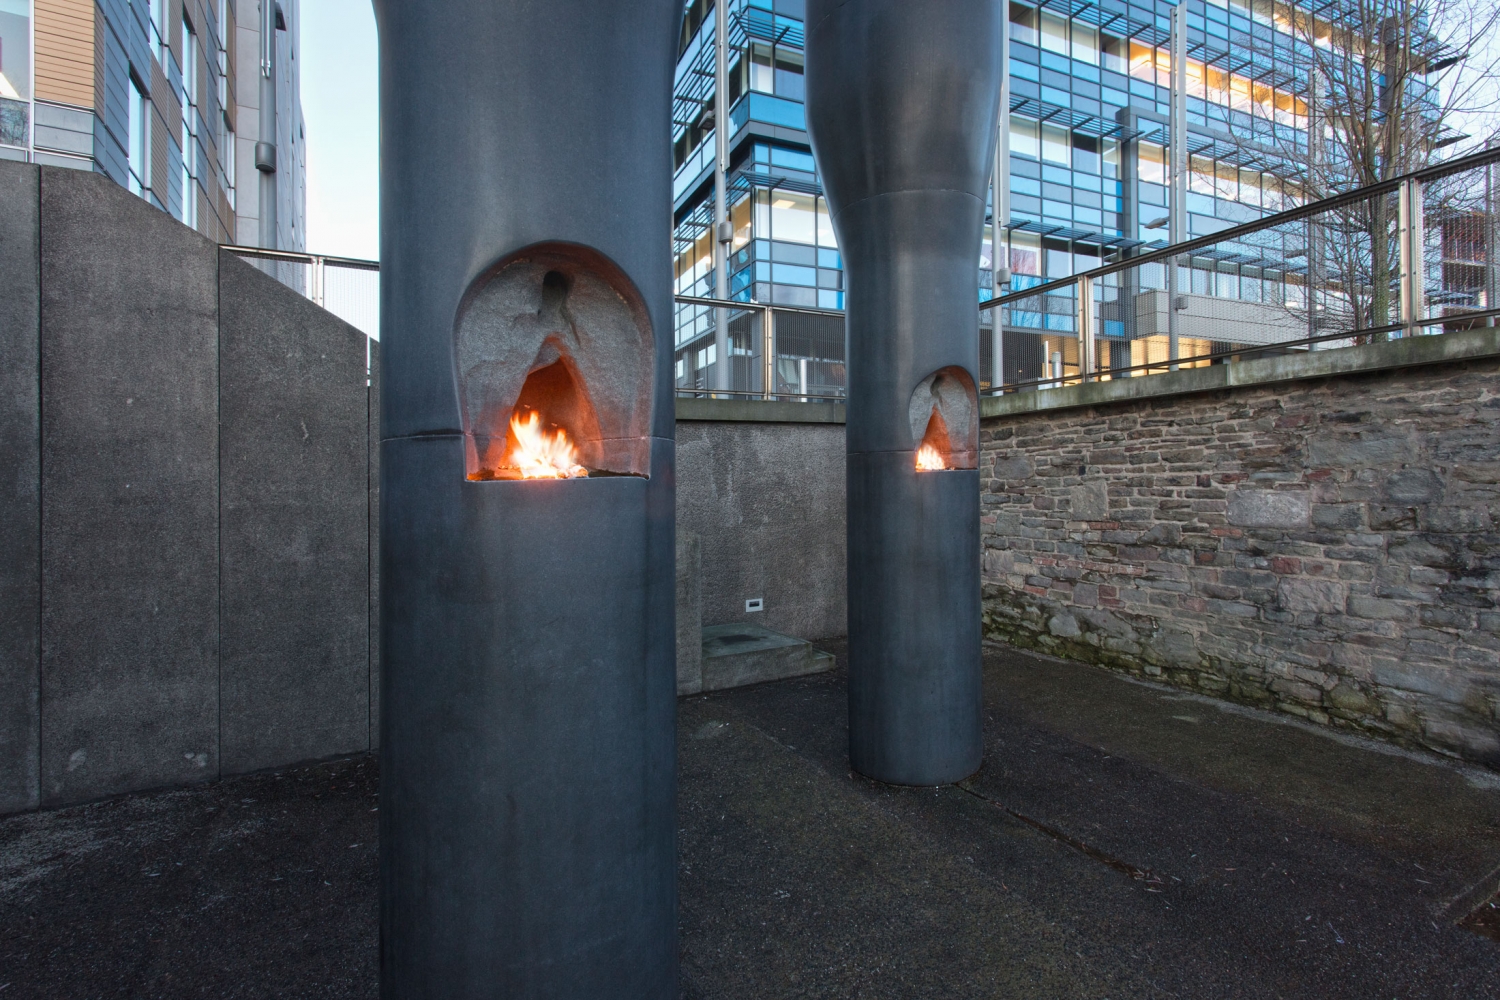 Roger Hiorns Free Tank: The retrospective view of the pathway, 2012 &ndash; 2016